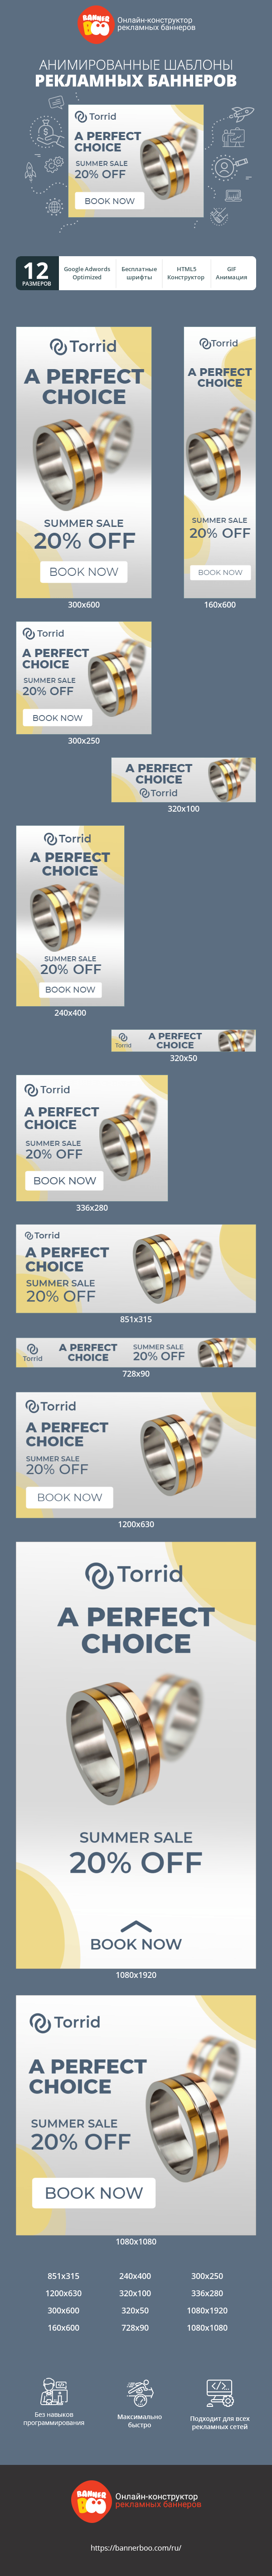 Banner ad template — A Perfect Choice — Summer Sale 20% Off